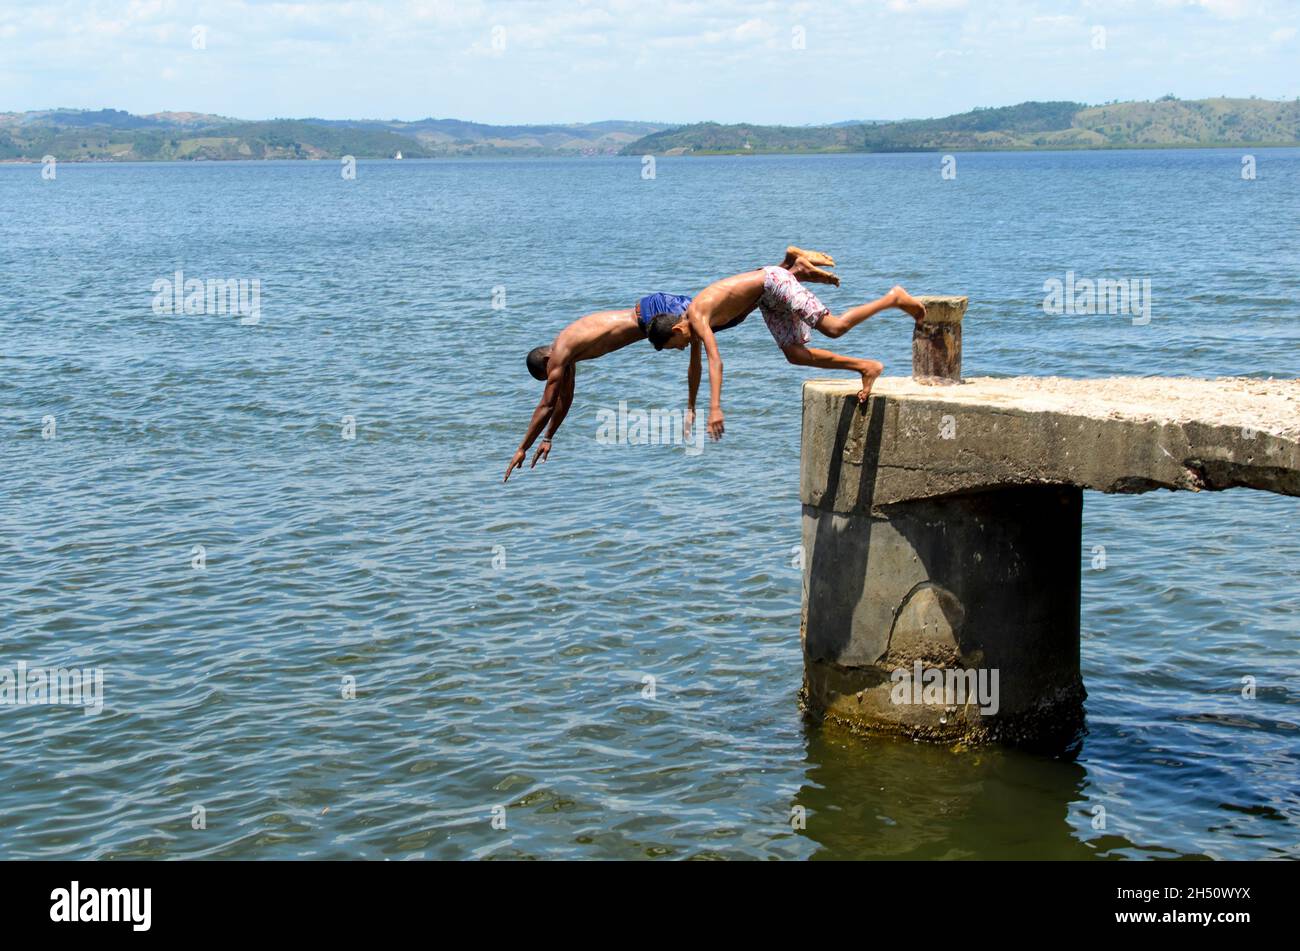 Cachoeira, Bahia, Brazil - November 29, 2014: Young people jumping from the deck of the Paraguacu River in Barra de Paraguacu, located in the Brazilia Stock Photo